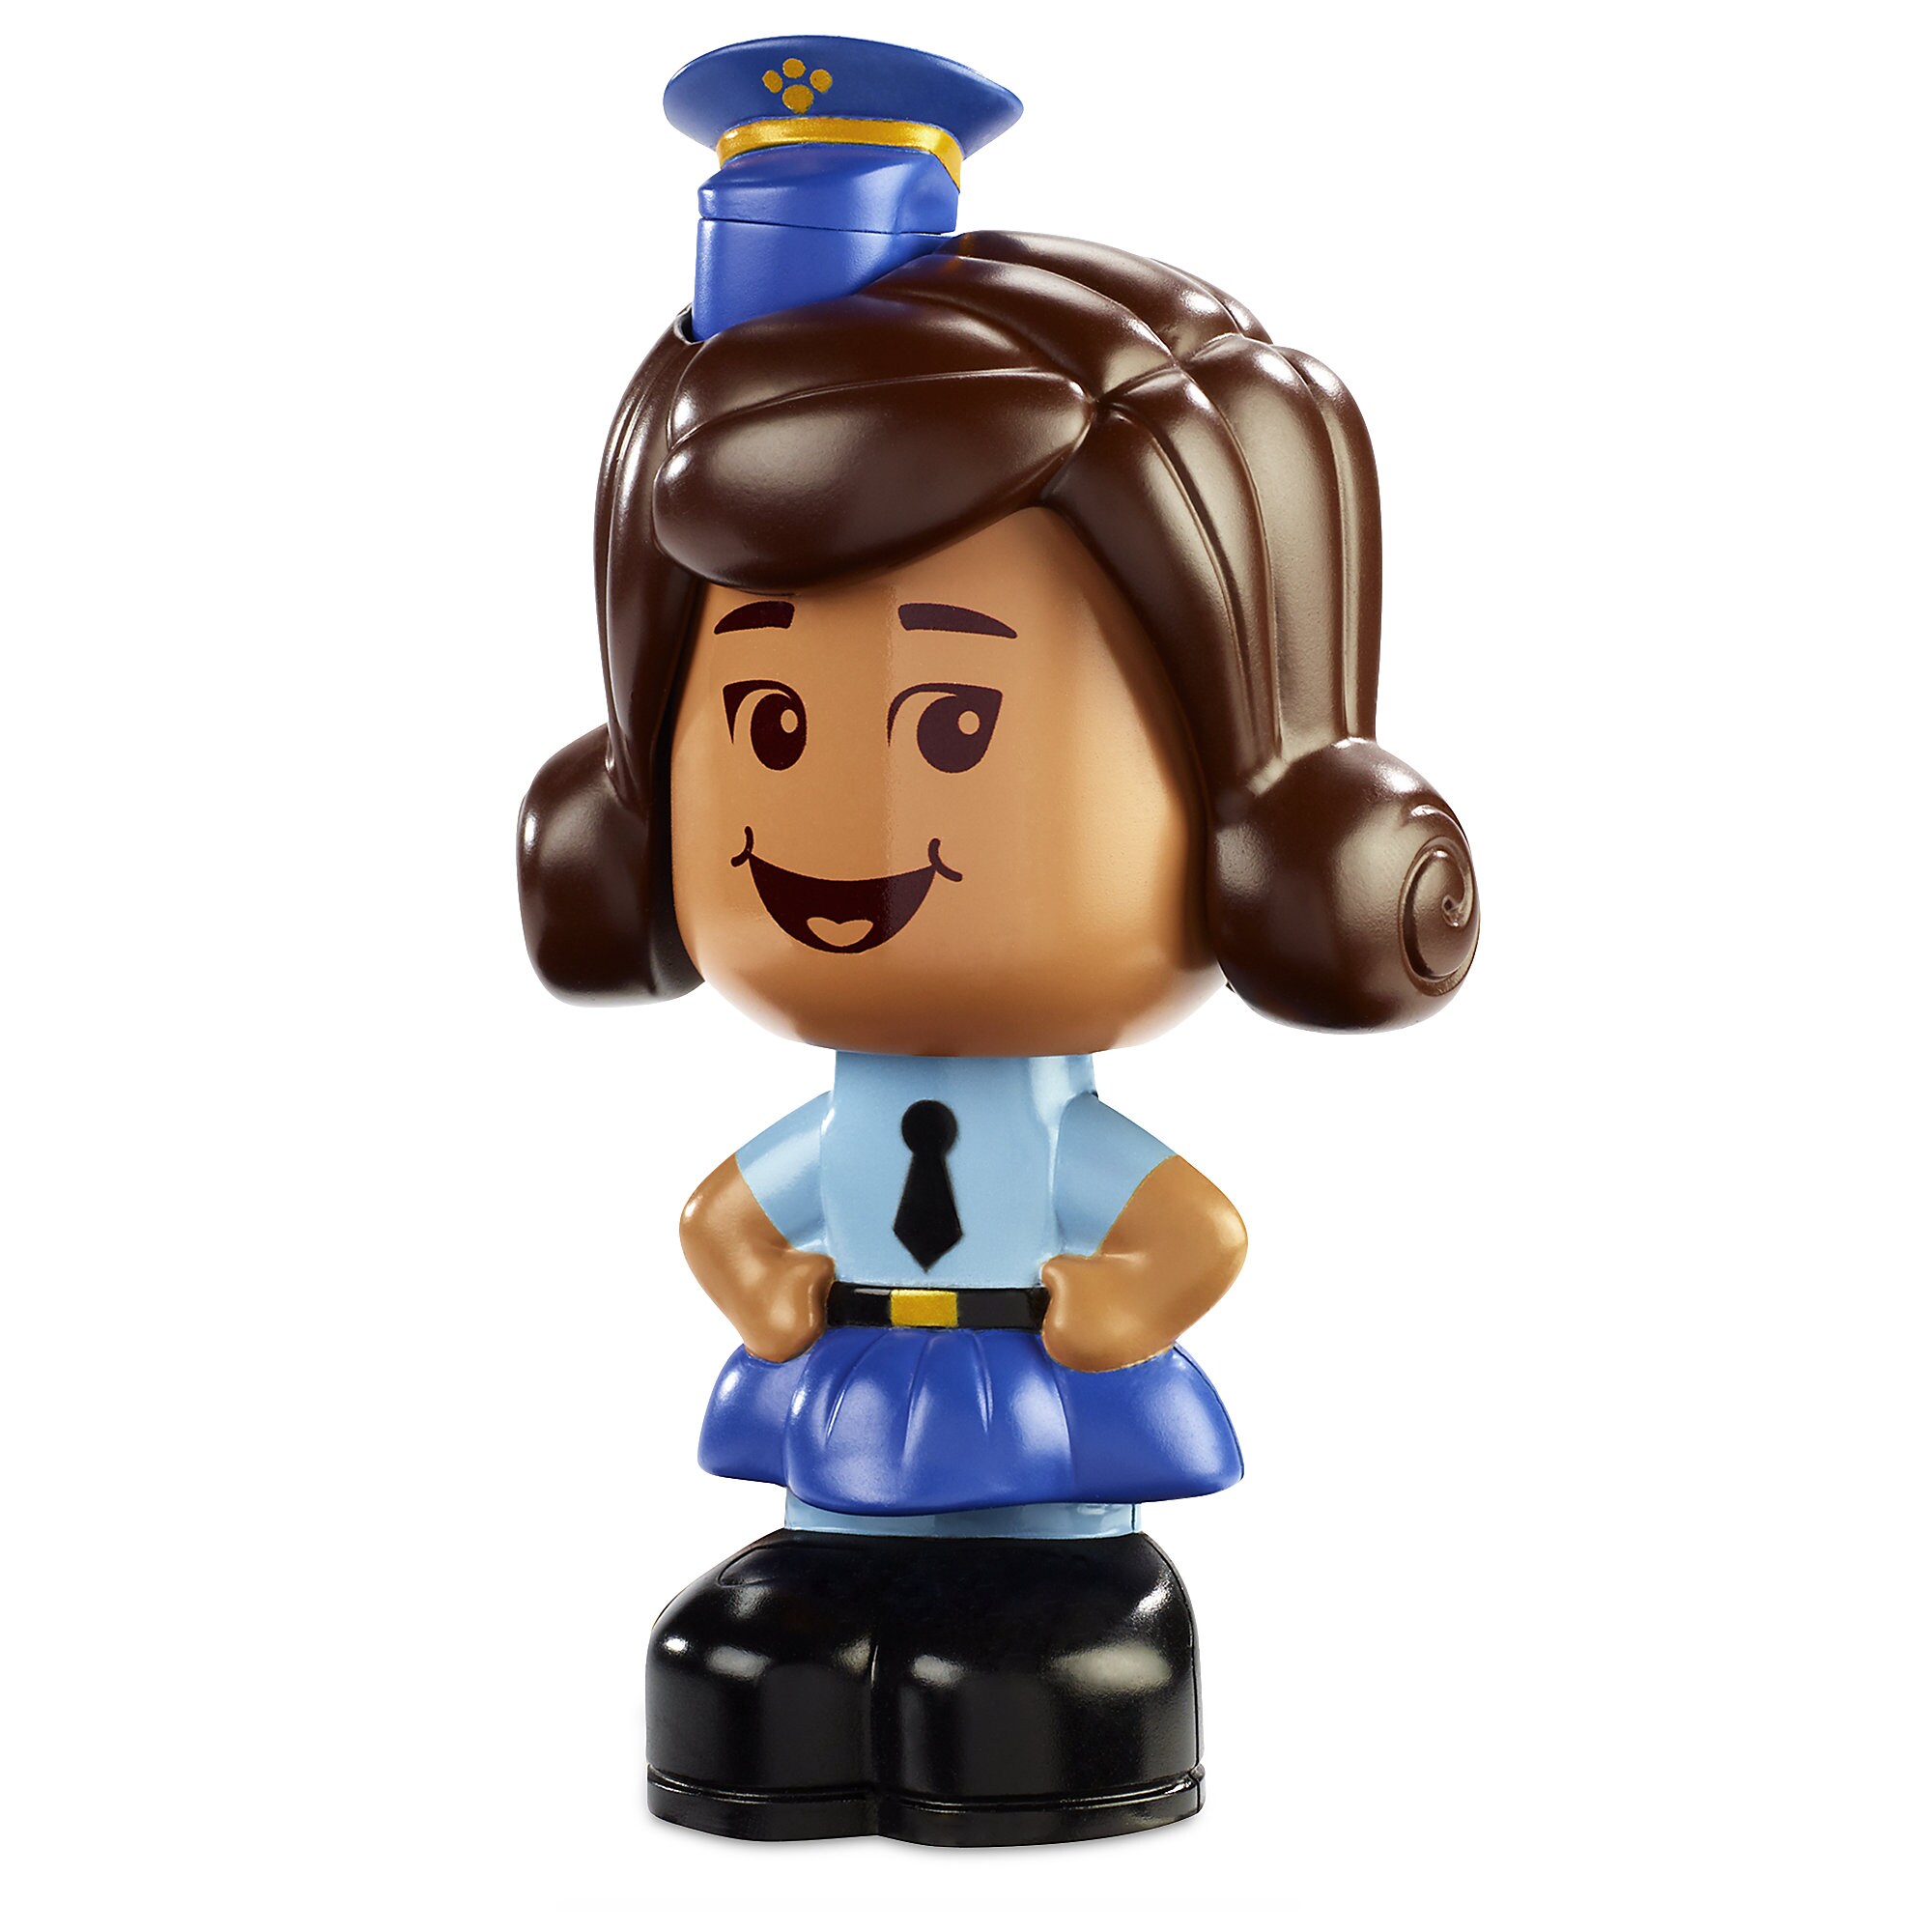 Officer Giggle McDimples Talking Figure - Toy Story 4